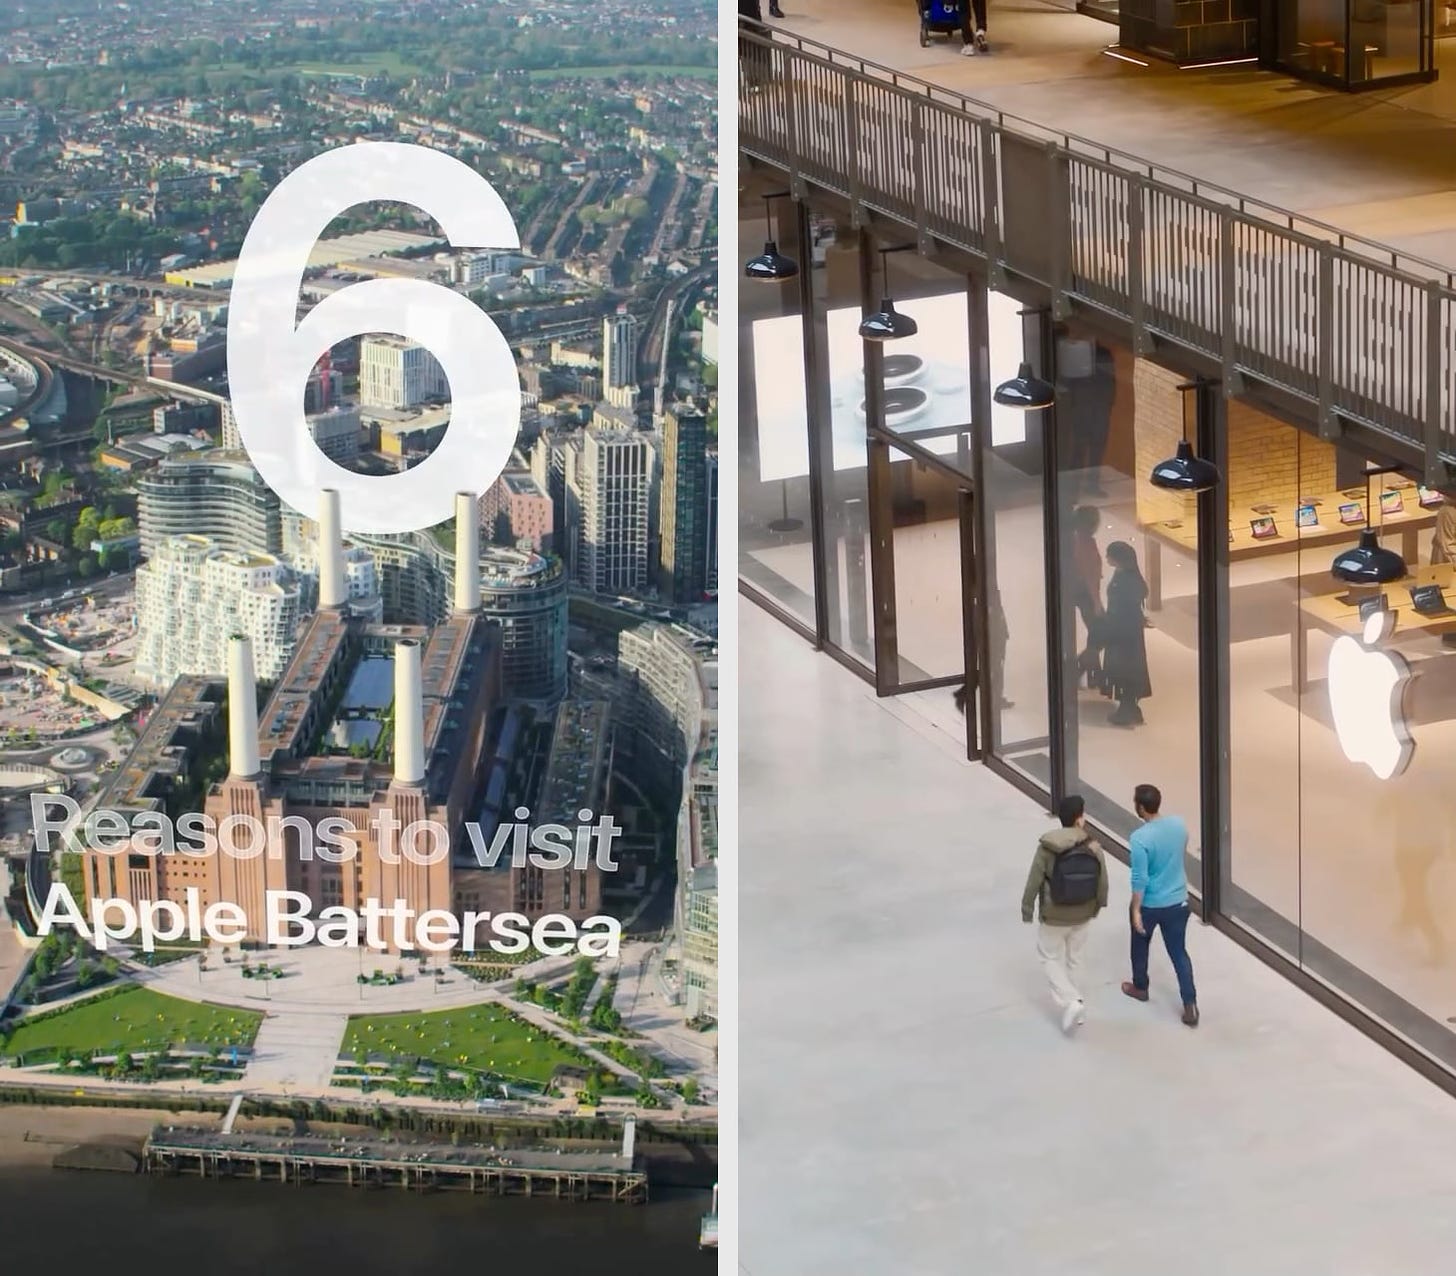 Two screenshots from an Instagram Reel promoting Apple Battersea. The left image is an aerial shot of Battersea Power Station. The right image is an exterior shot of the Apple Store.